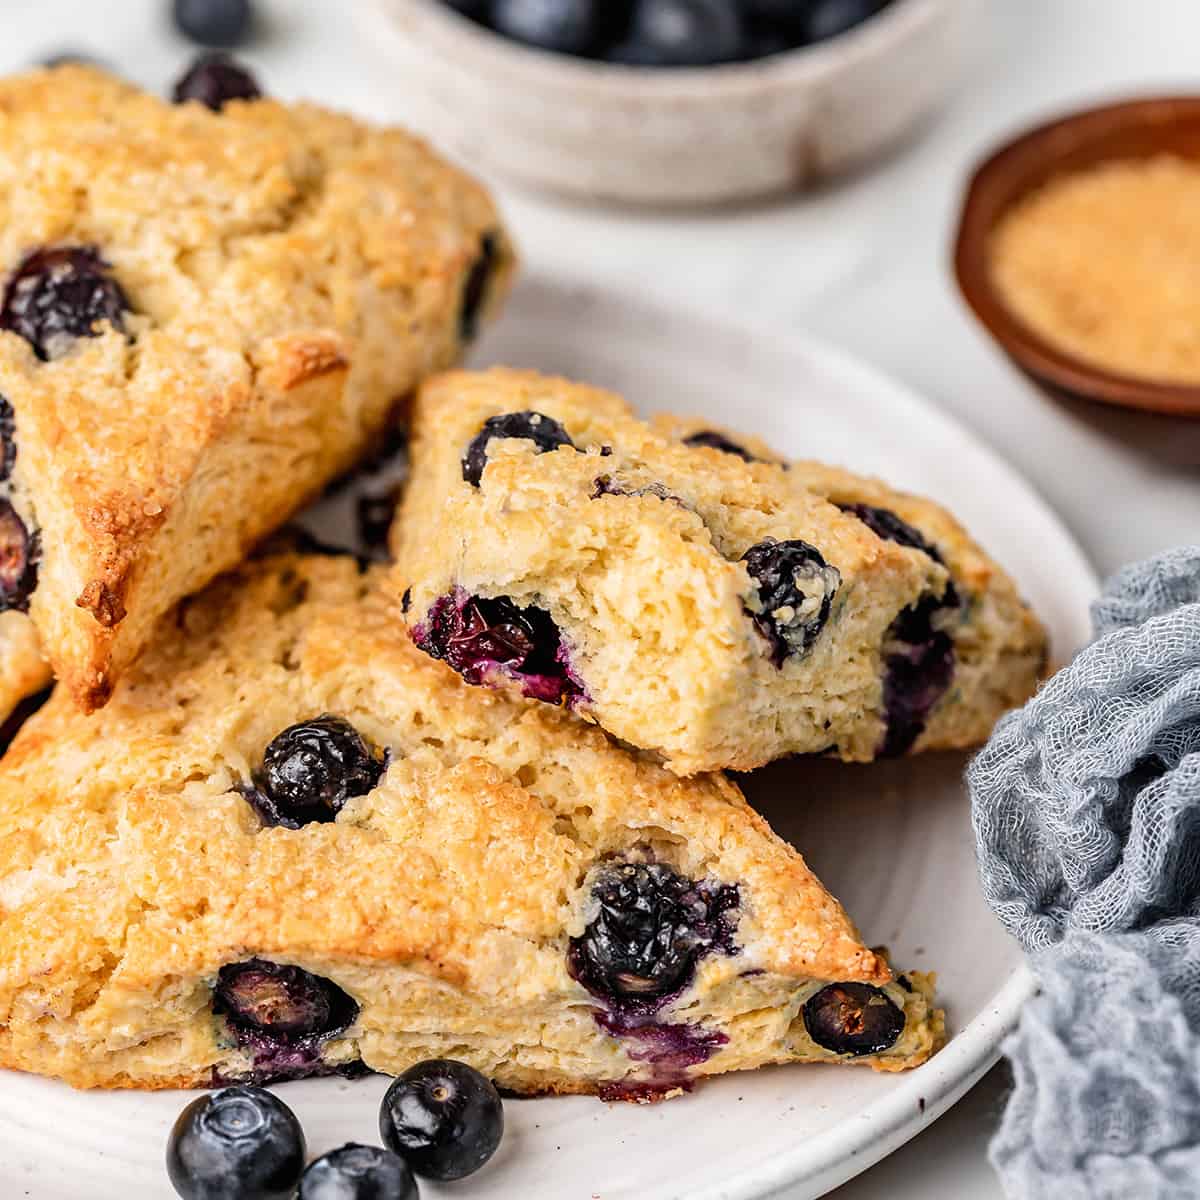 3 Blueberry Scones on a plate, one has a bite taken out of it